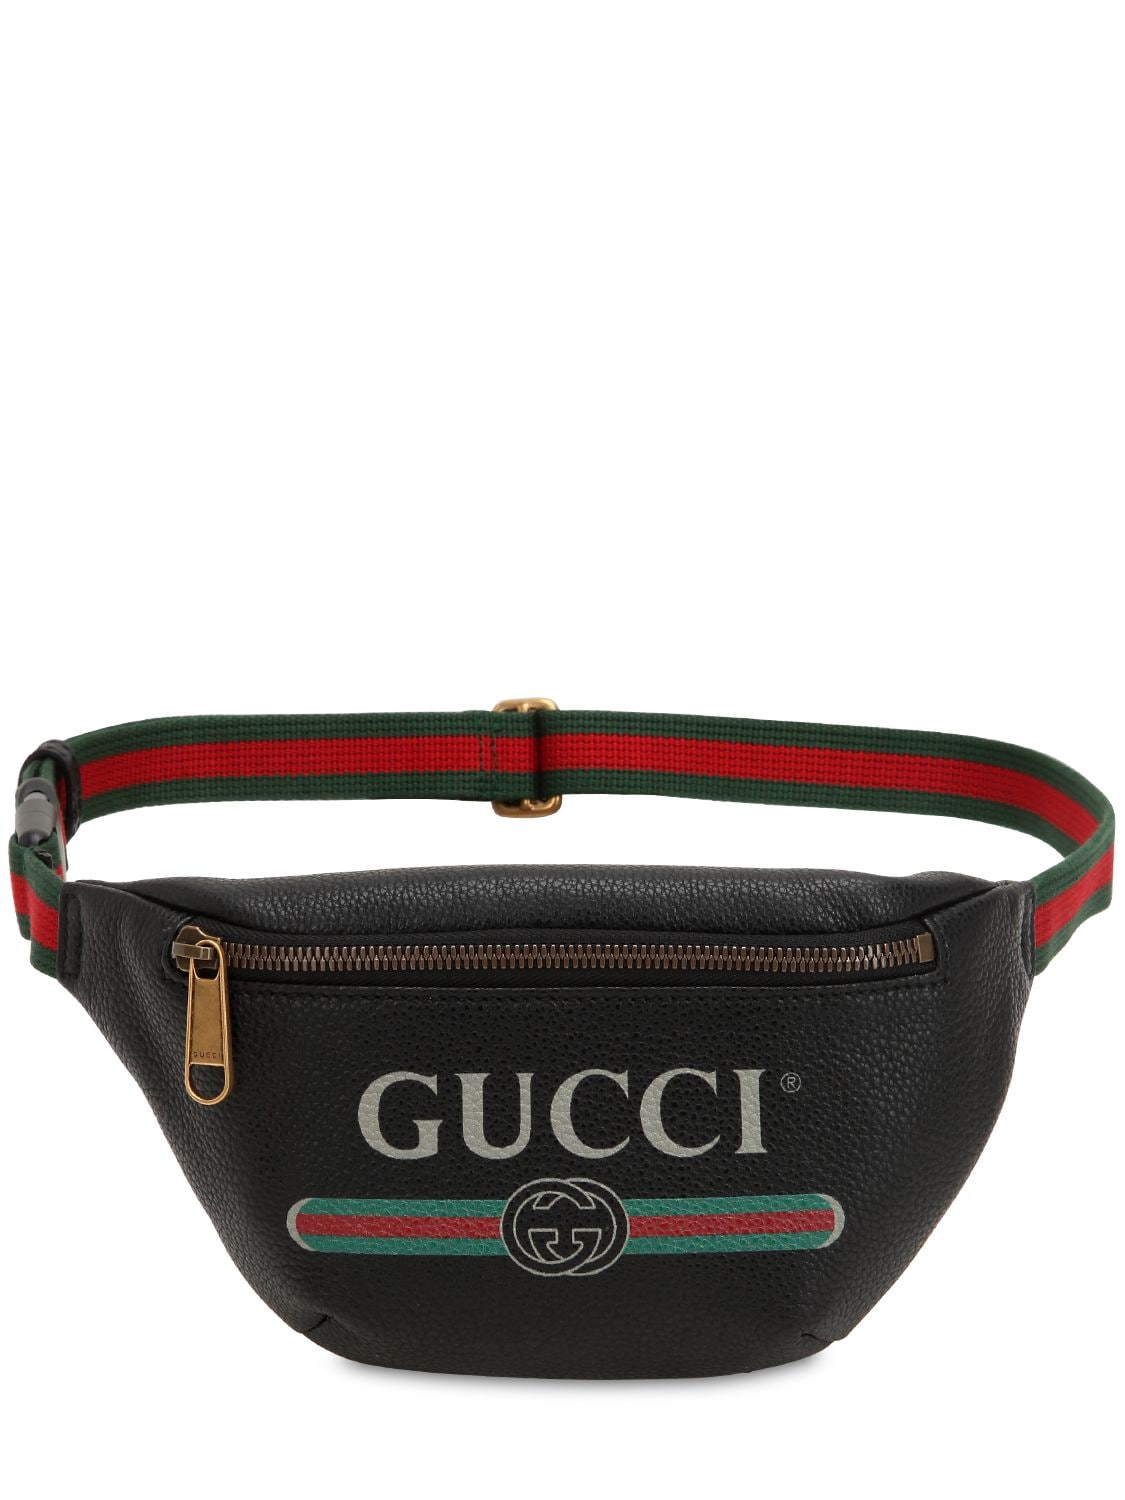 Gucci Monogram Canvas Fanny Pack (28566-002058) – Luxury Leather Guys